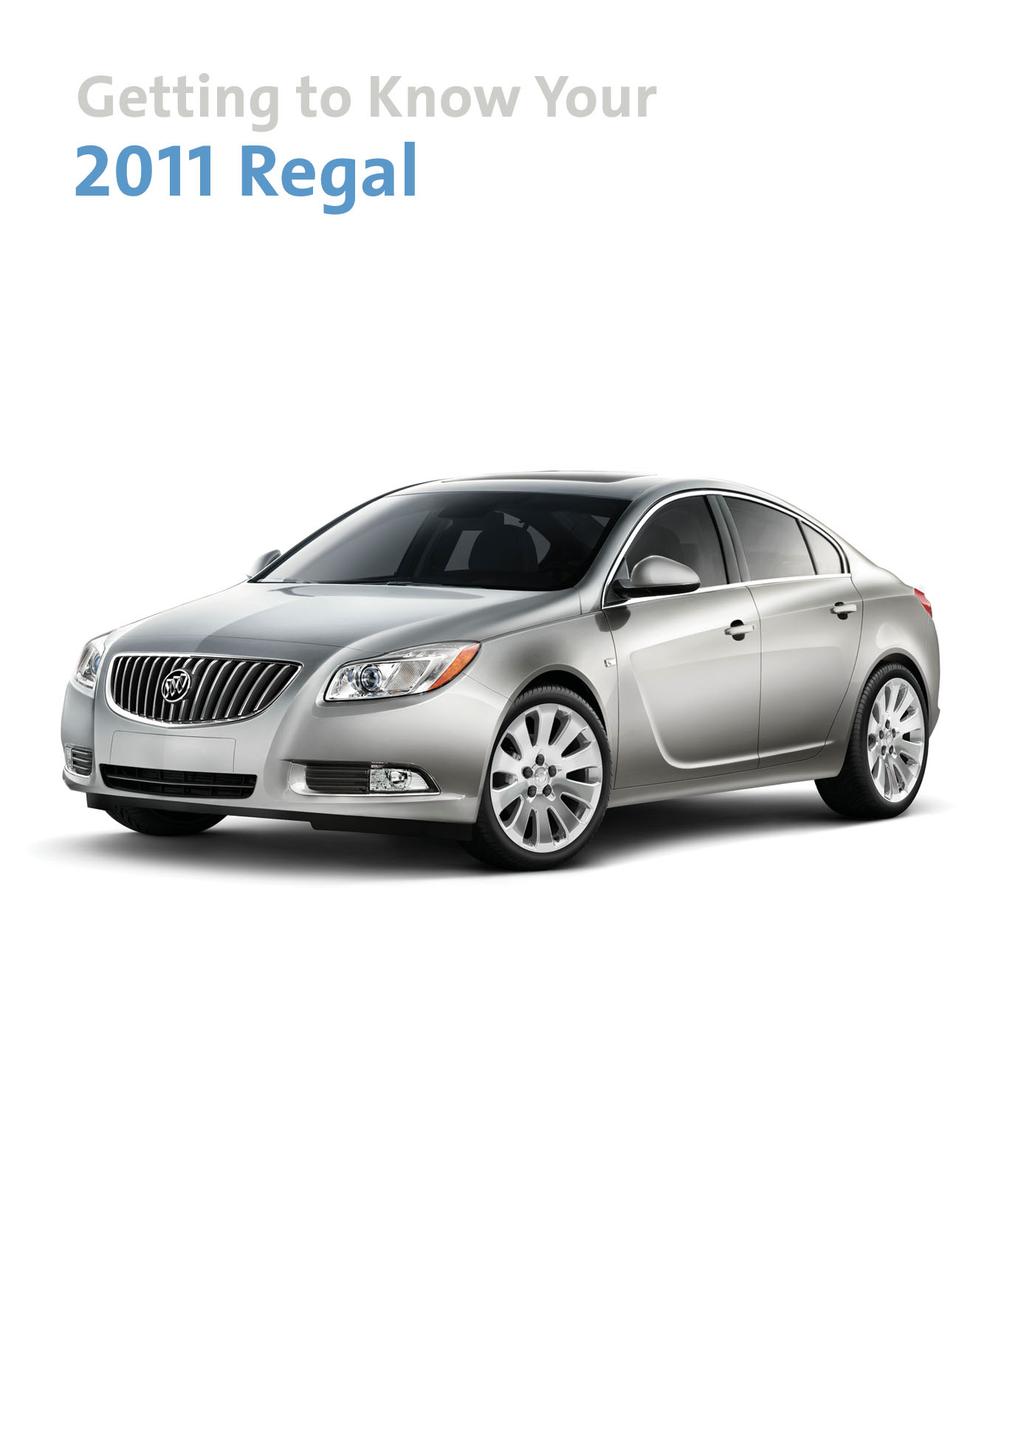 Review this Quick Reference Guide for an overview of some important features in your Buick